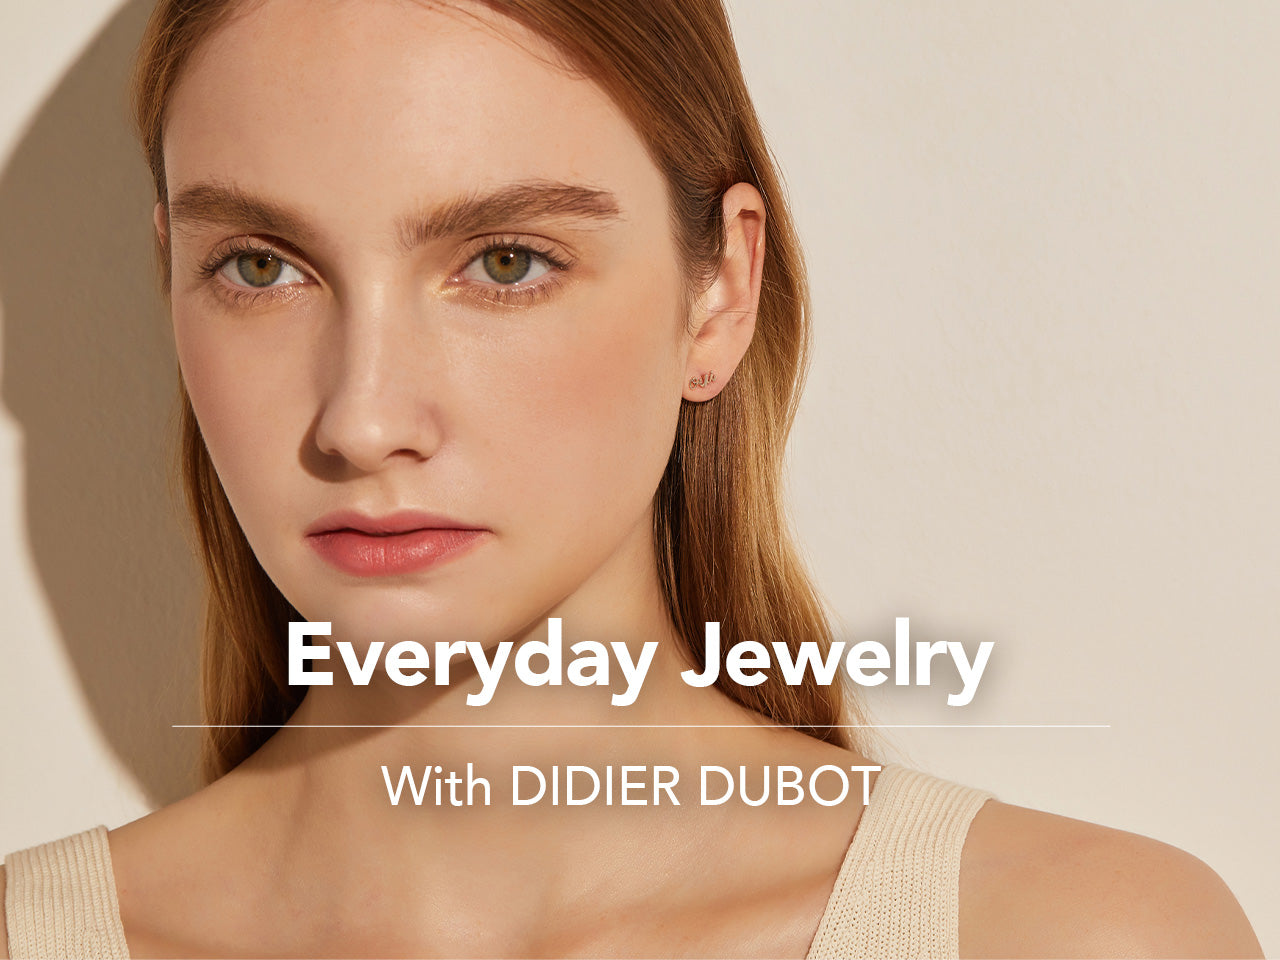 Everyday Jewelry With DIDIER DUBOT